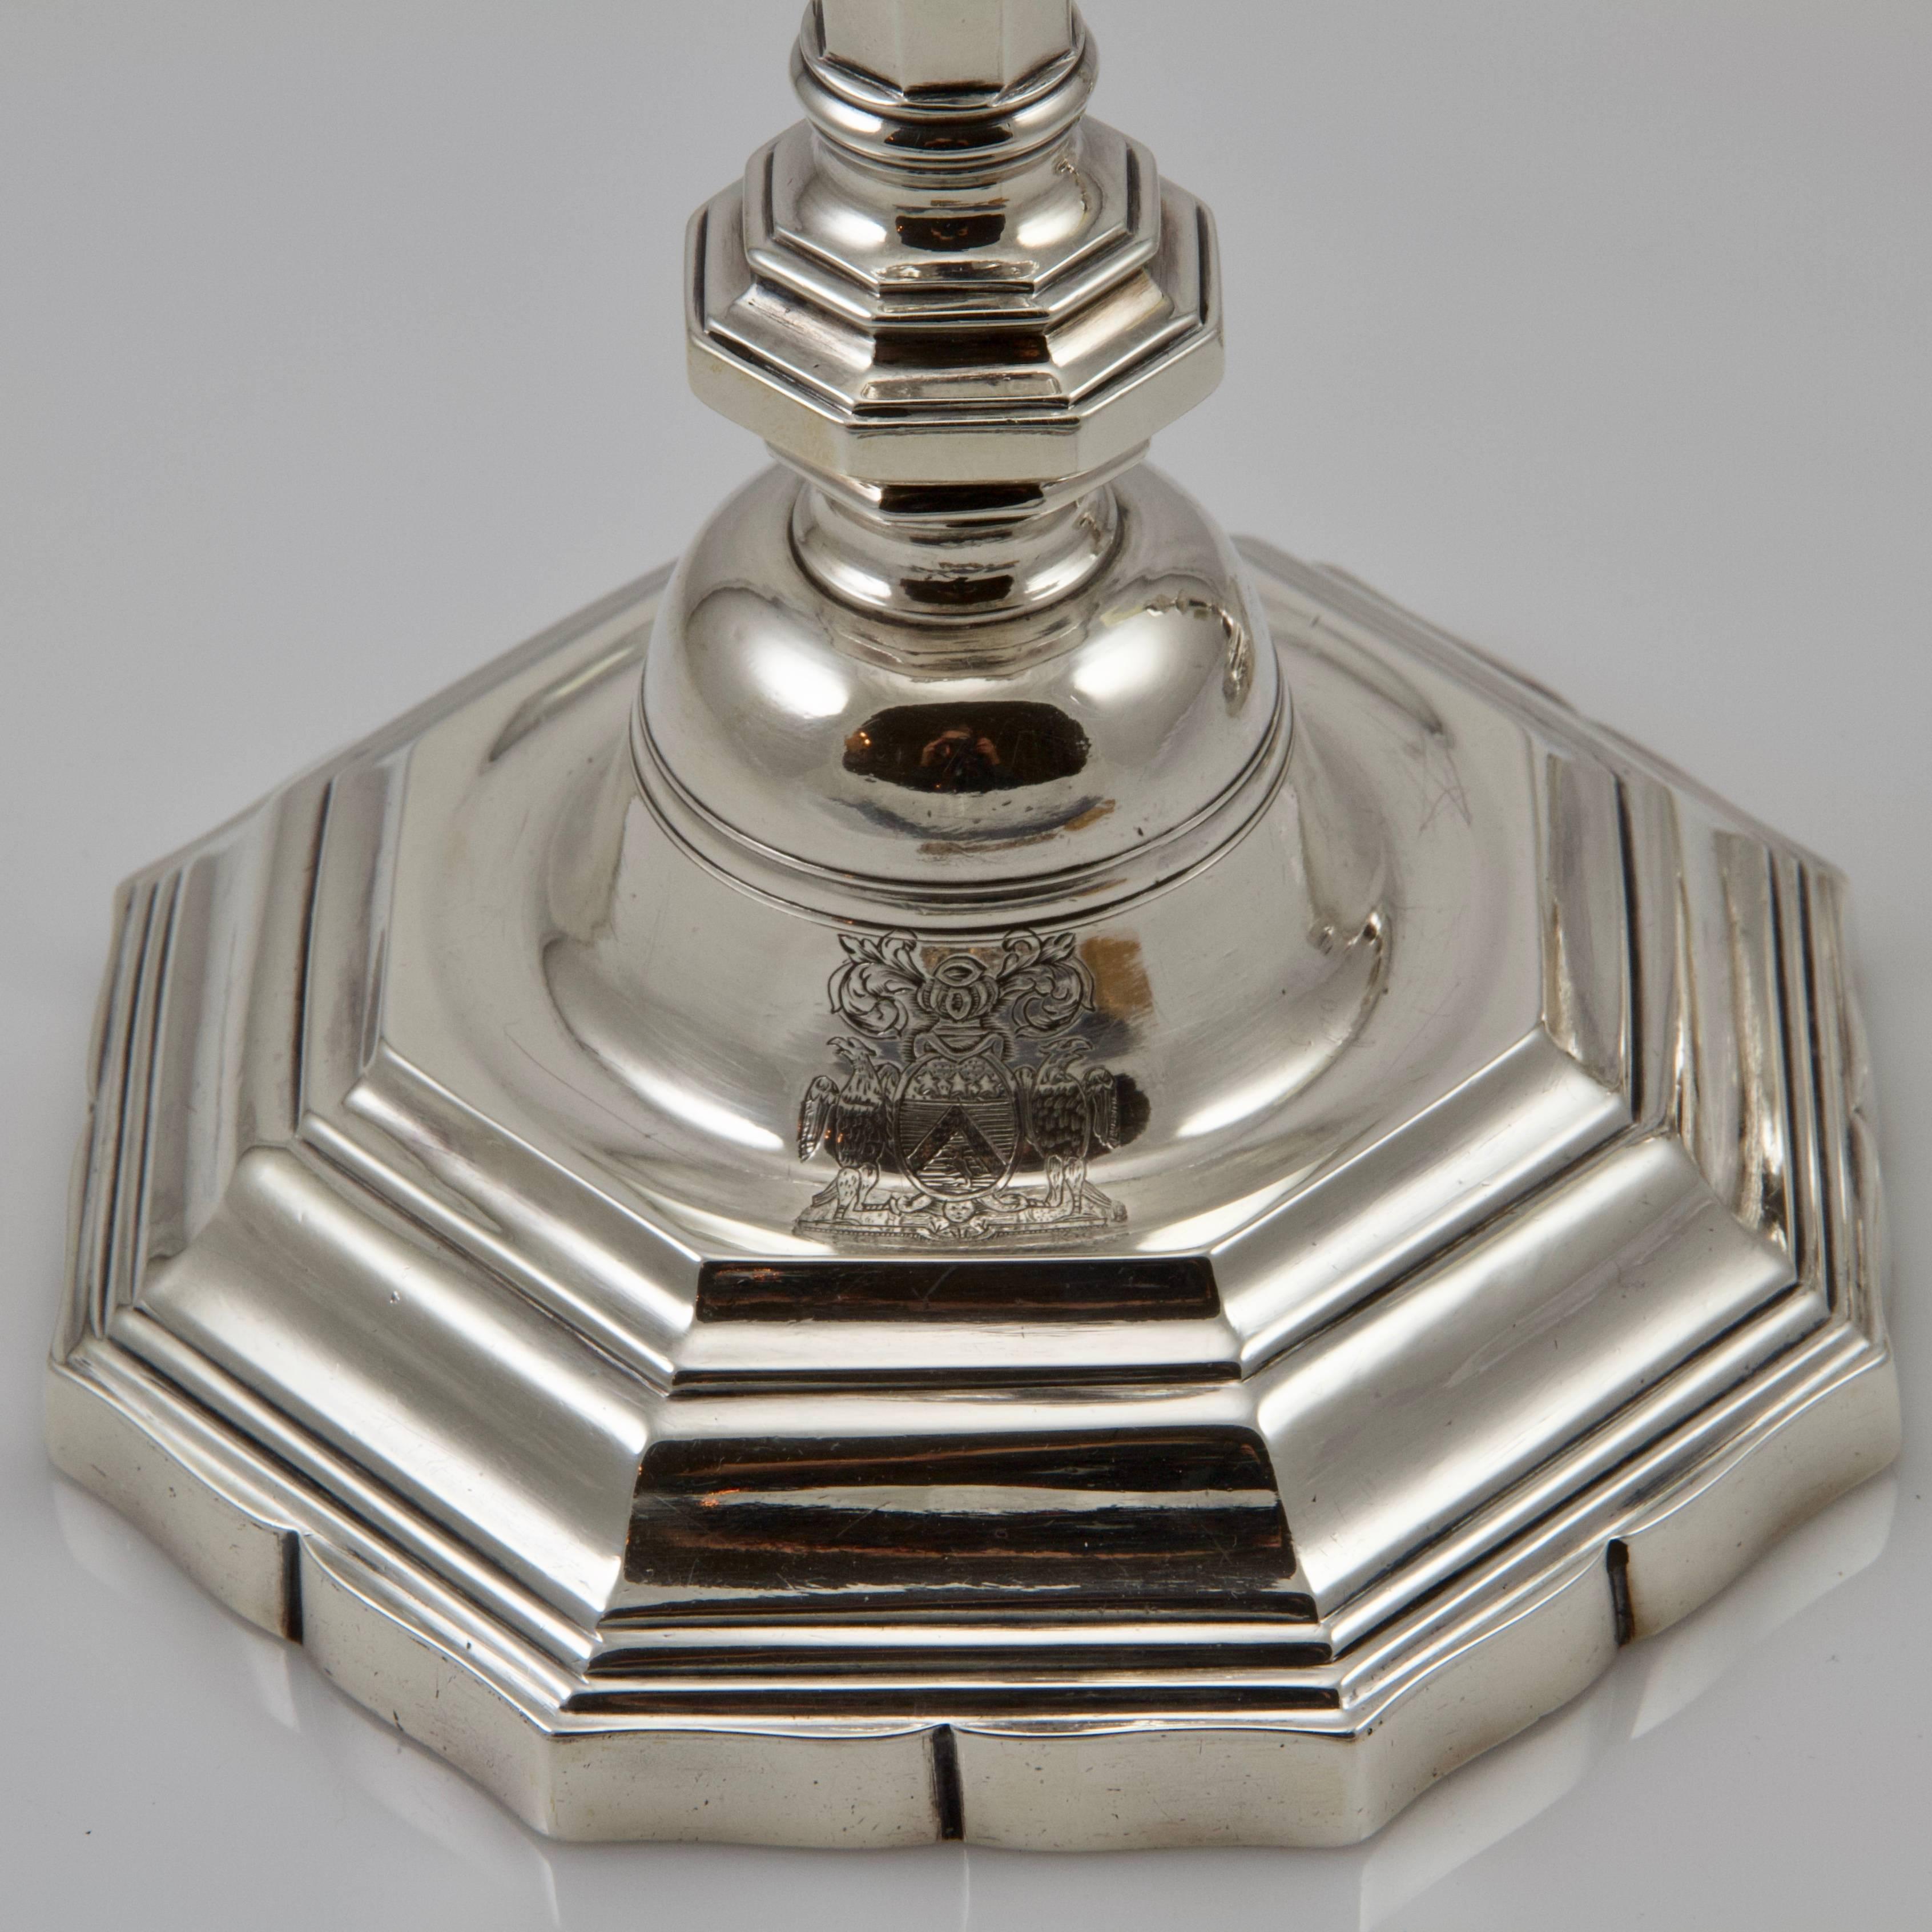 Very simple and chic table candlesticks pair in silver on hexagonal foot with a curving shape edge with a triangular baluster stem swelling out towards to the top. 
In the most typical and pur main of the Louis XV style. 
Engraved on the foot with